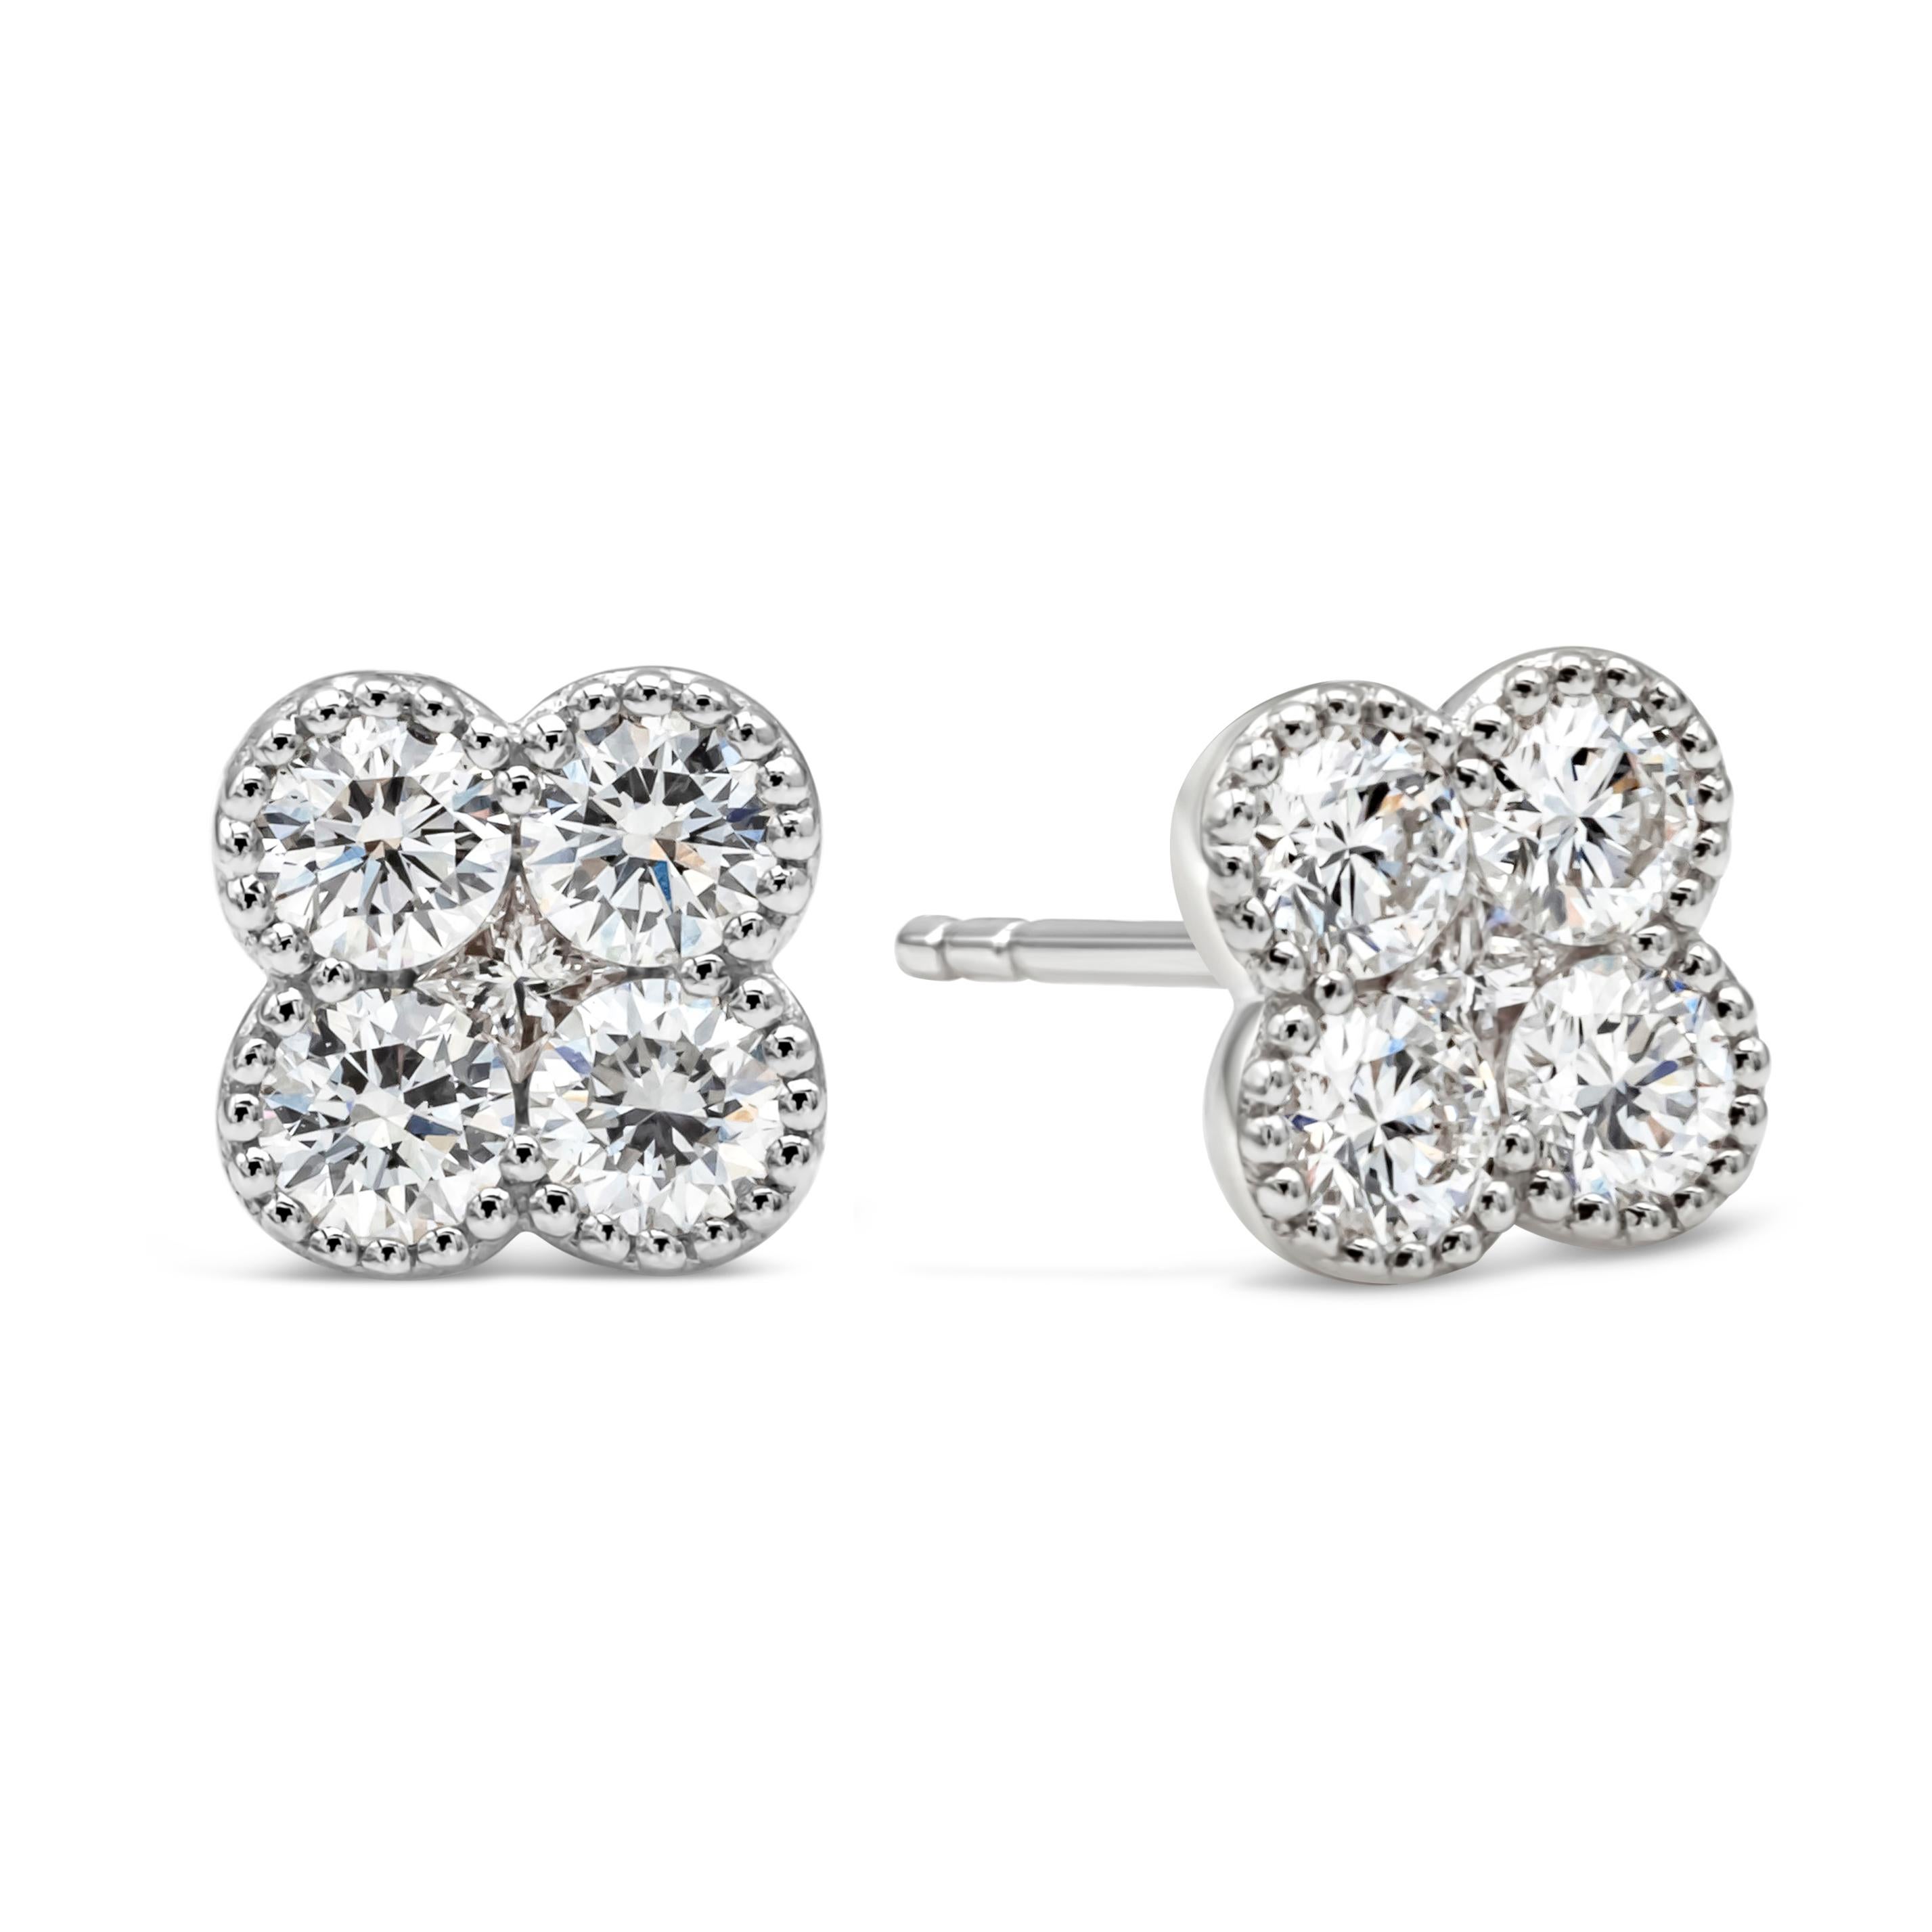 A simple and chic pair of stud earrings showcasing a cluster of round brilliant diamonds weighing 0.75 carats total, F color and VS in clarity, arranged in a beautiful clover design and shared prong basket setting. Finely made in 18k white